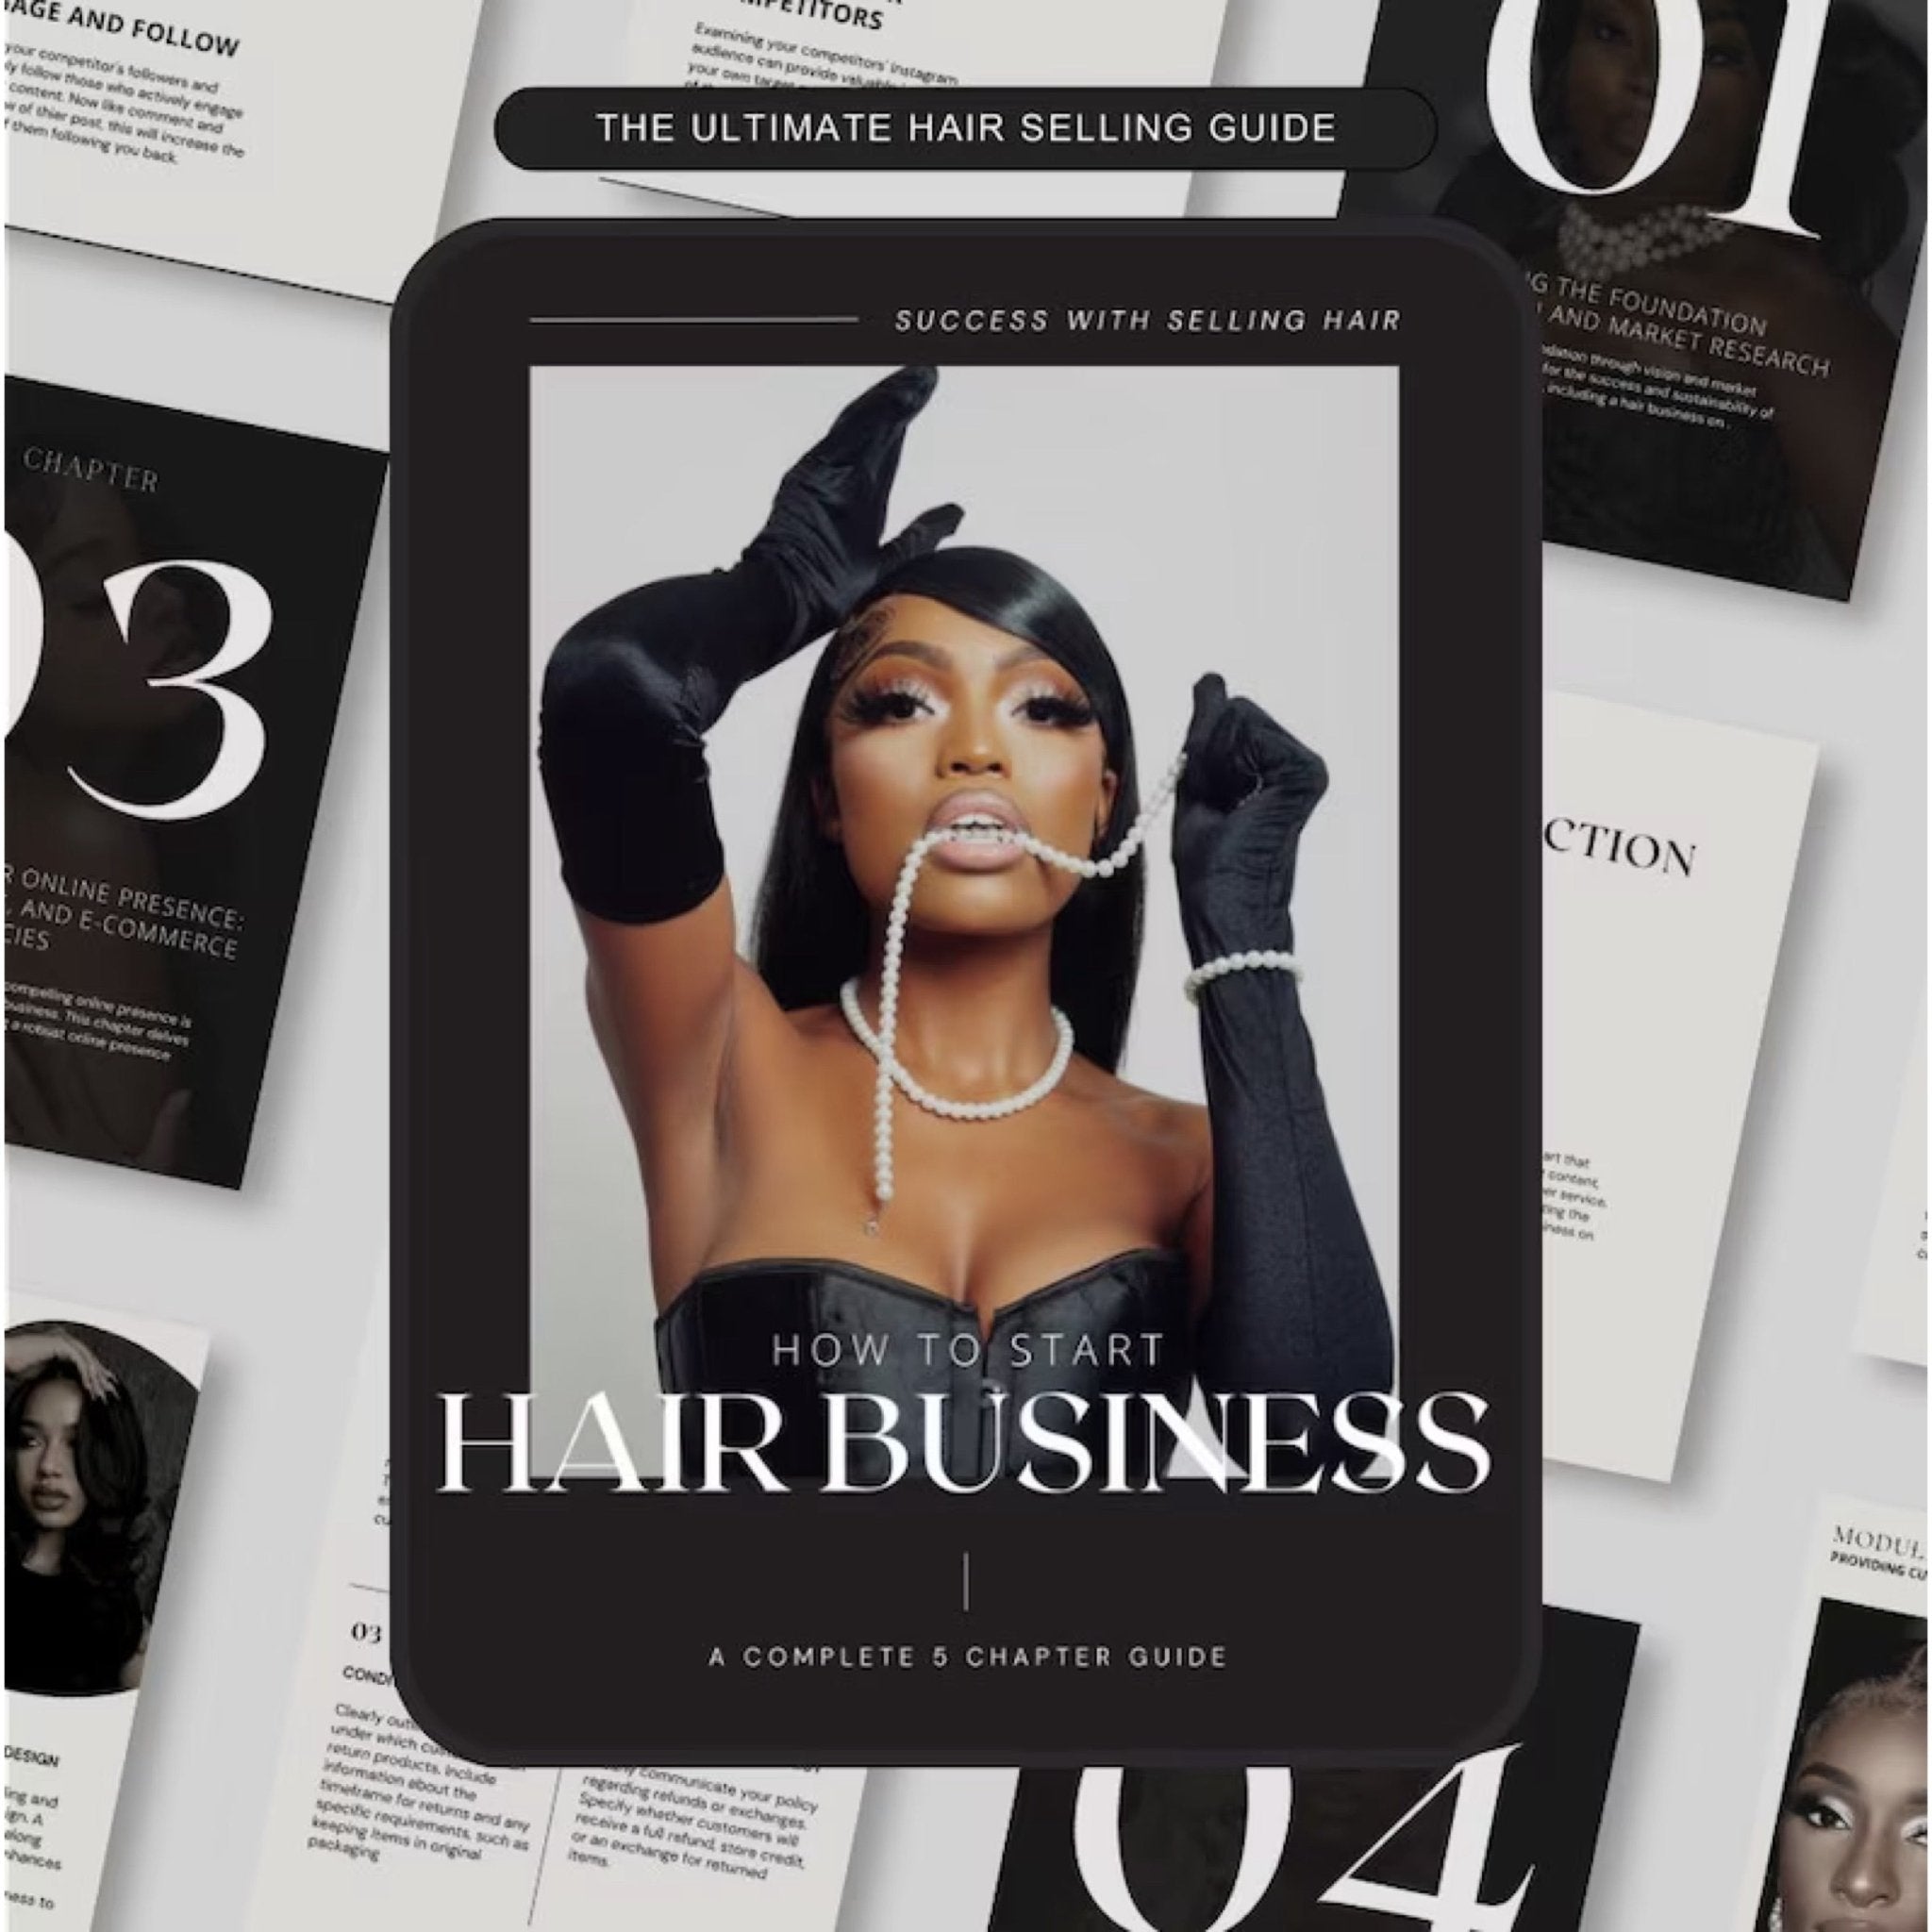 How To Start A Hair Business - Digital Product Store